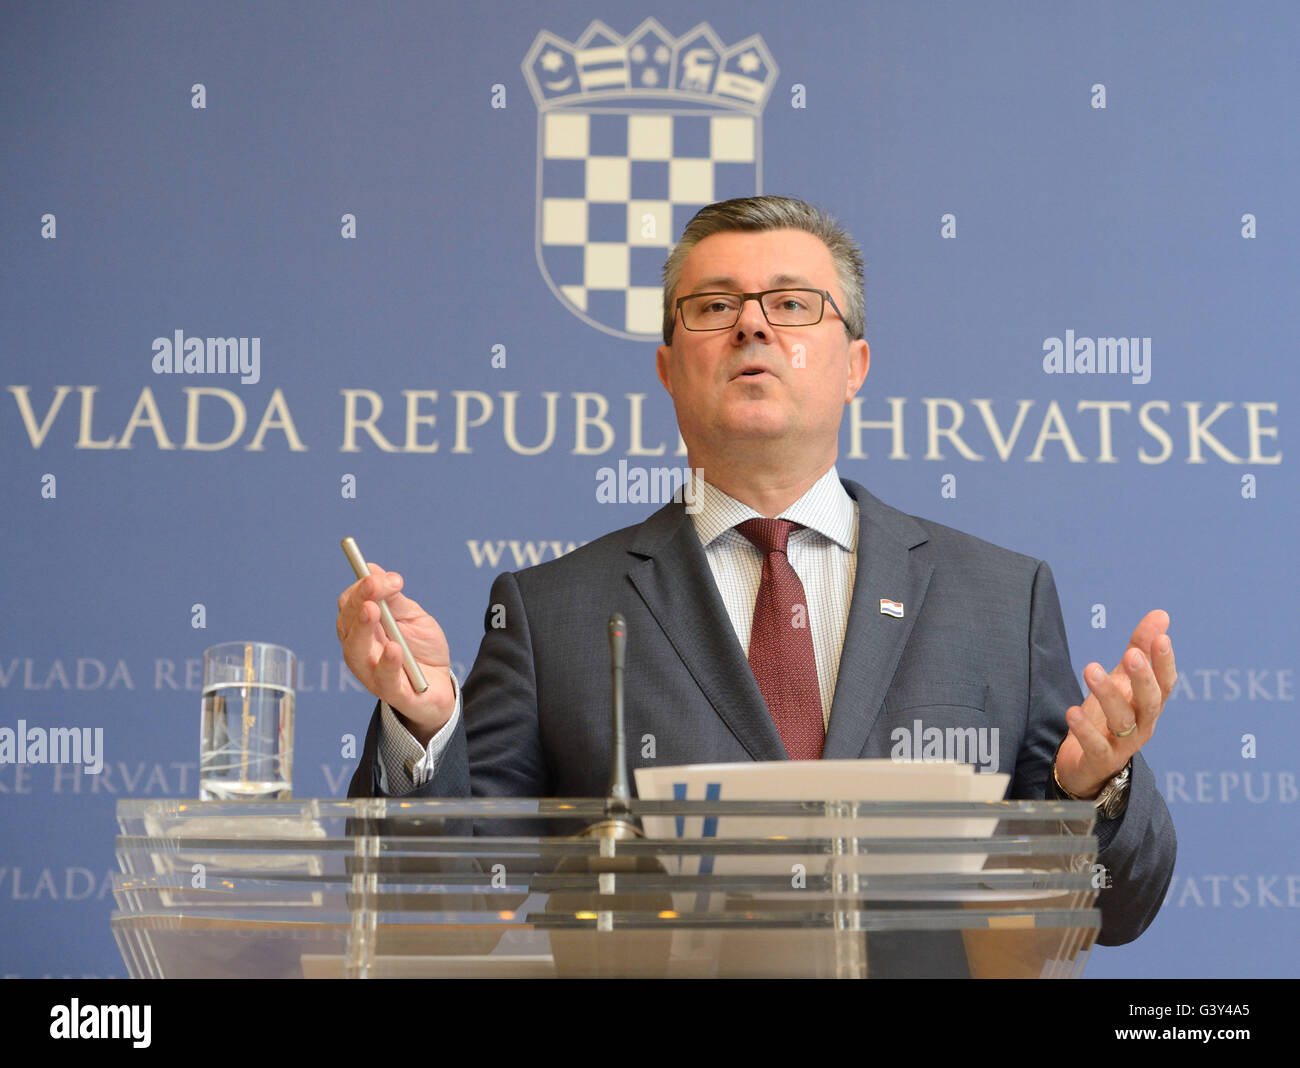 (160616) -- ZAGREB, June 16, 2016 (Xinhua) -- A file photo taken on April 28, 2016 shows Tihomir Oreskovic speaking at a news conference in Zagreb, Croatia. The Croatian parliament on Thursday passed a no-confidence vote against Prime Minister Tihomir Oreskovic and his government. (Xinhua/Miso Lisanin) Stock Photo